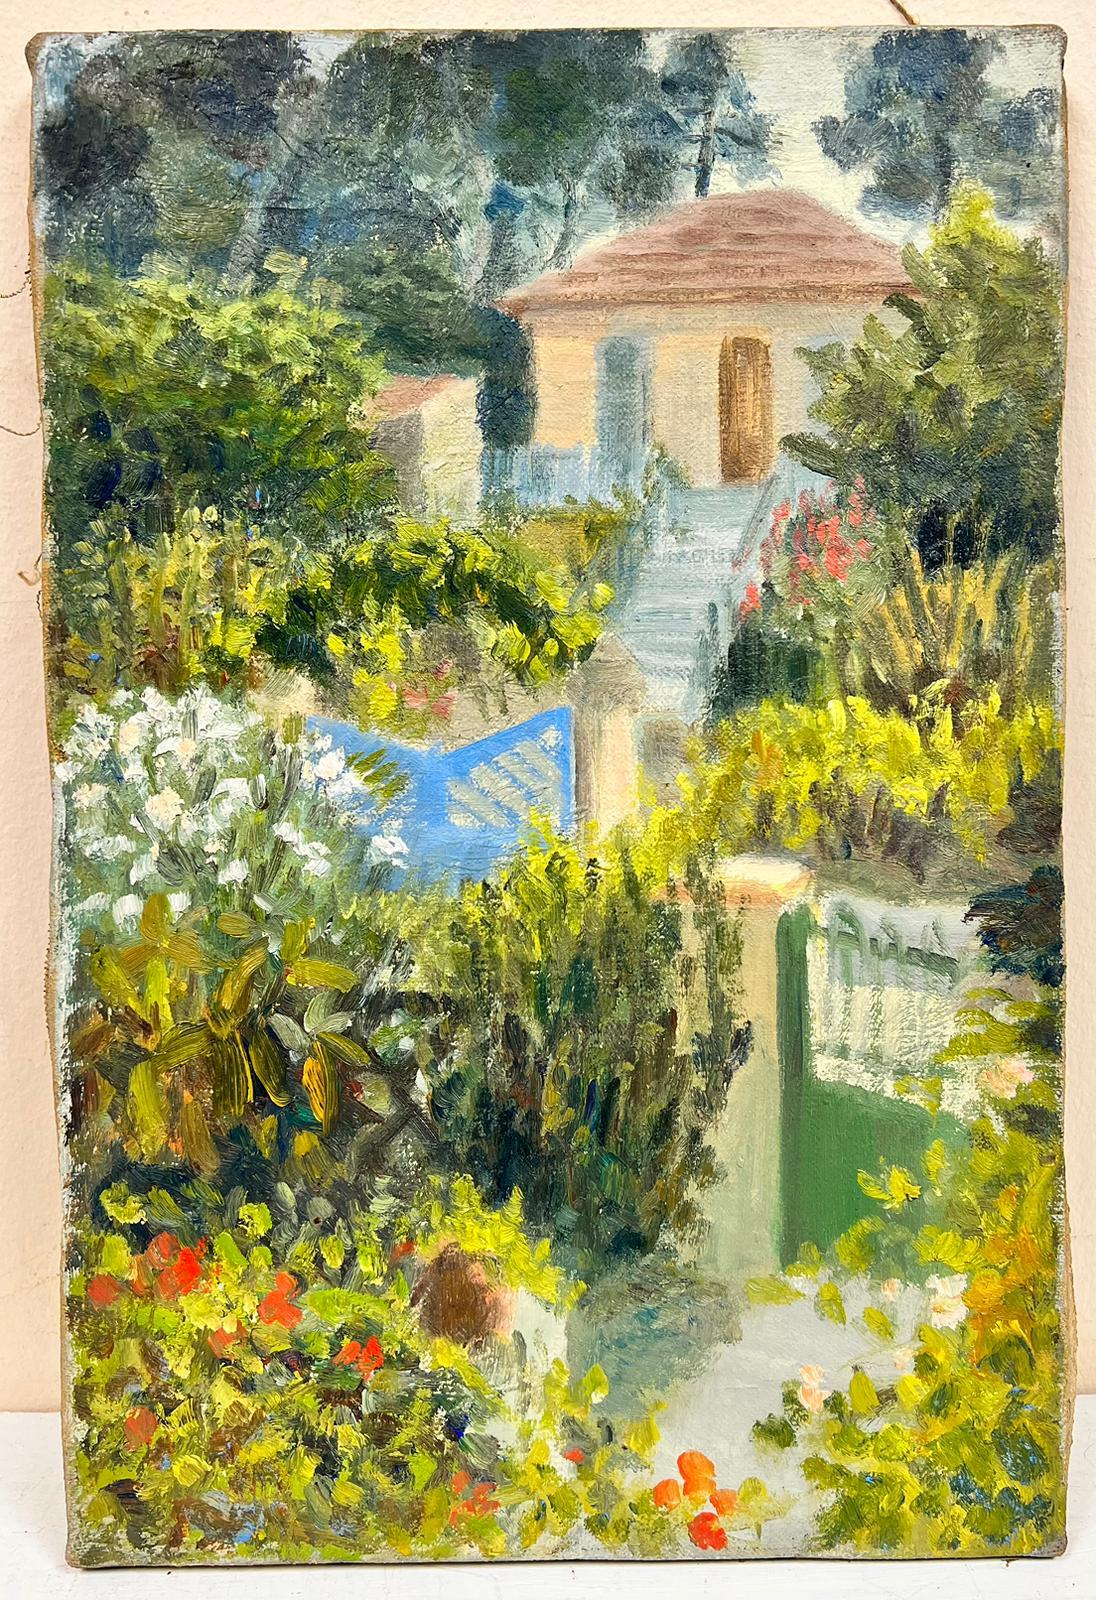 The Pathway To The House In The Green Garden Landscape Oil - Painting by Josine Vignon